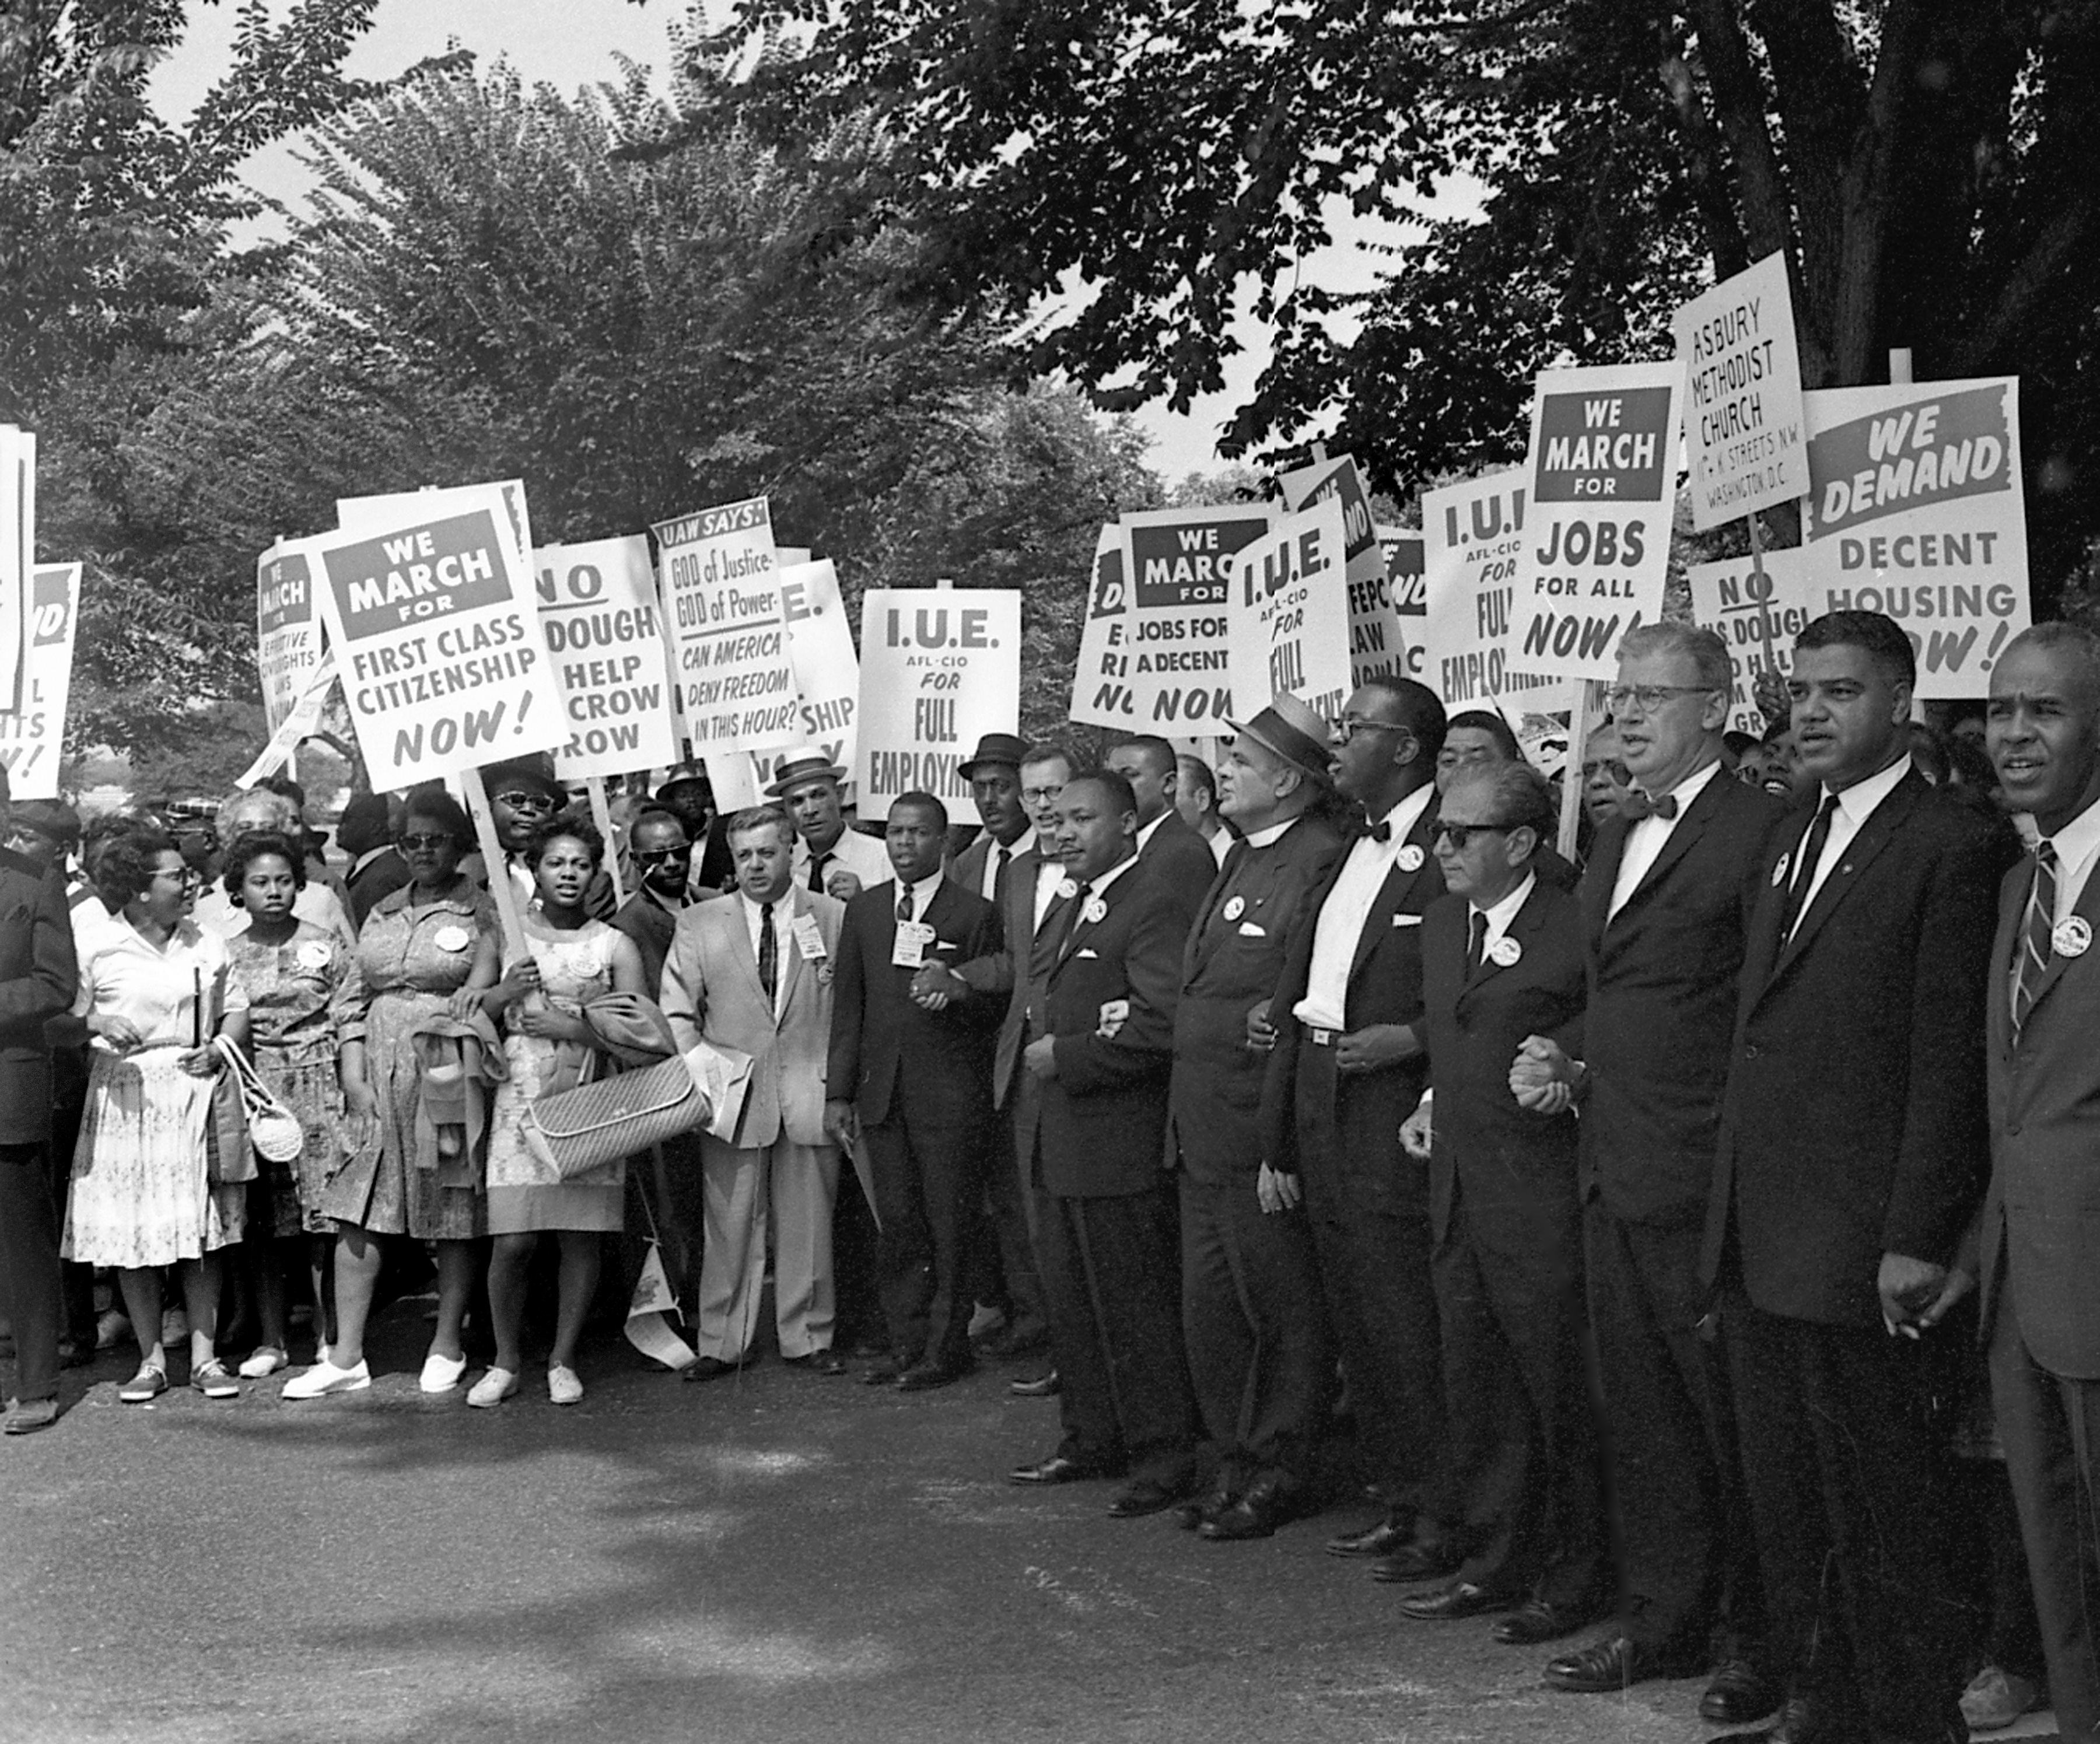 "The March" reveals the story behind the 1963 March on Washington on